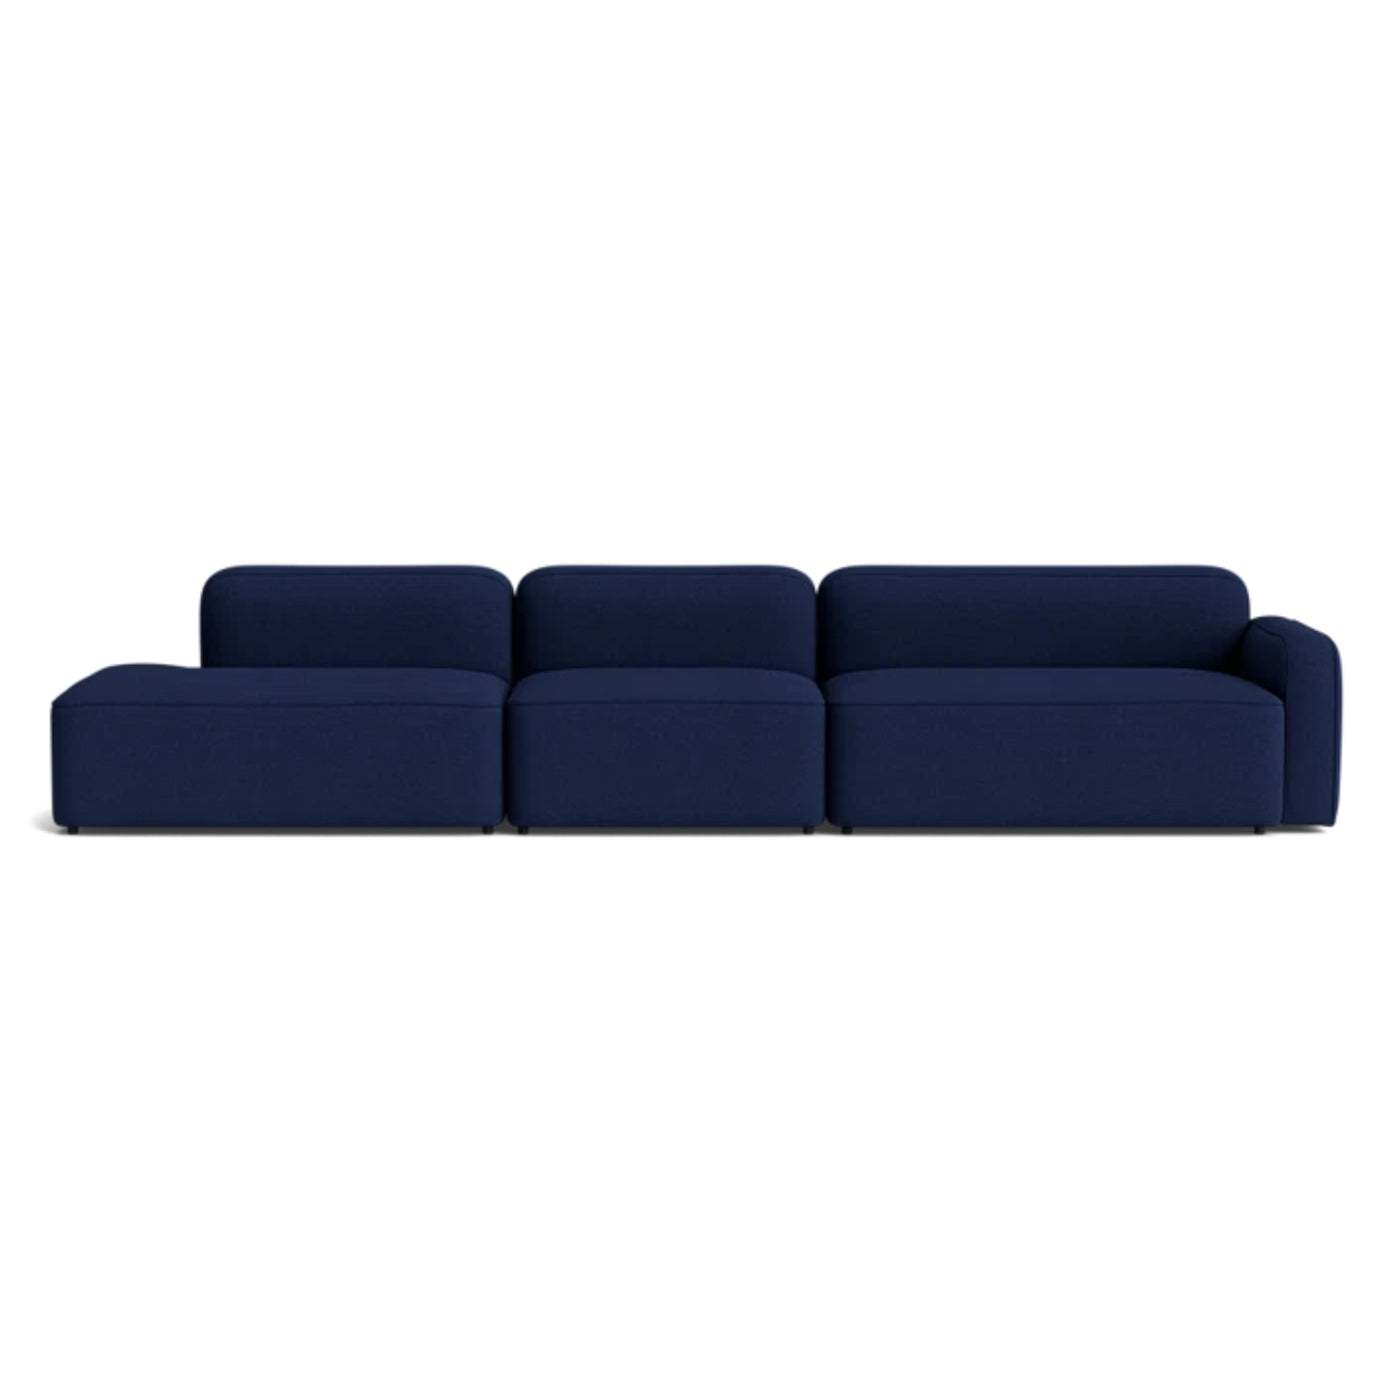 Normann Copenhagen Rope 3 Seater Modular Sofa. Made to order at someday designs. #colour_hallingdal-764